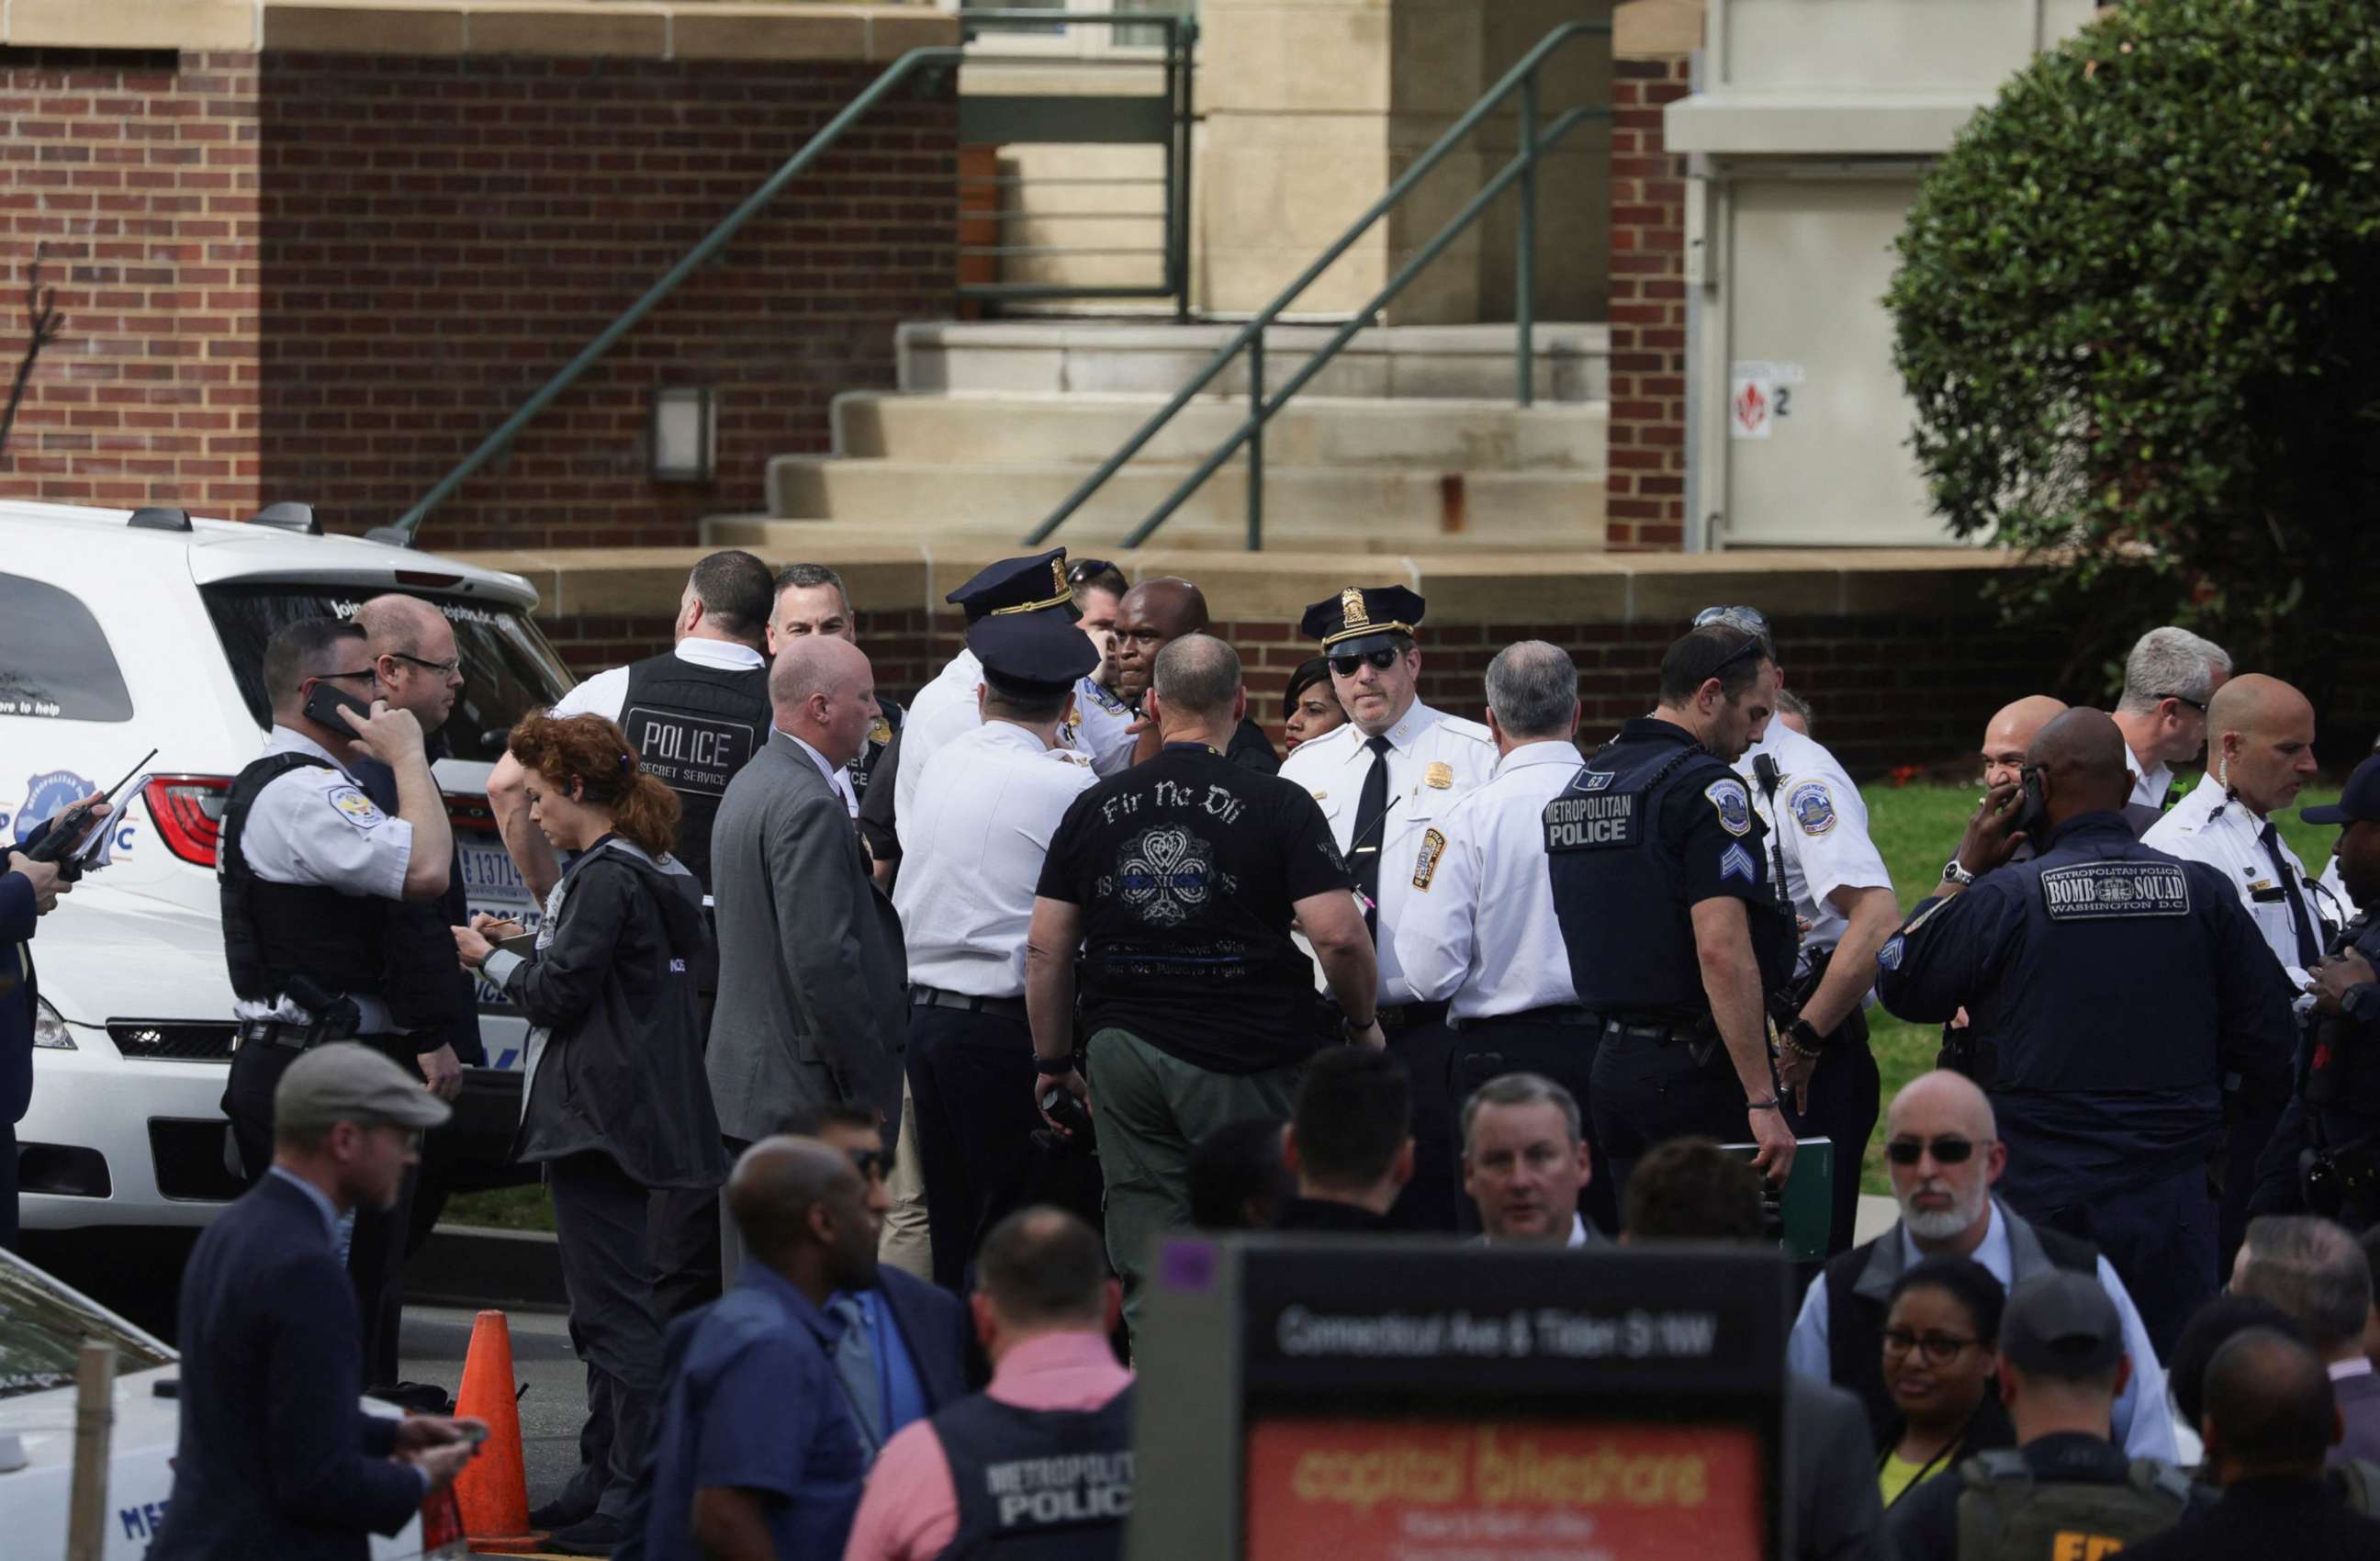 PHOTO: Washington, D.C. Metropolitan police and other law enforcement officers respond to the scene of a reported active shooter near Edmund Burke Middle School in the Cleveland Park neighborhood of Washington, D.C., April 22, 2022. 